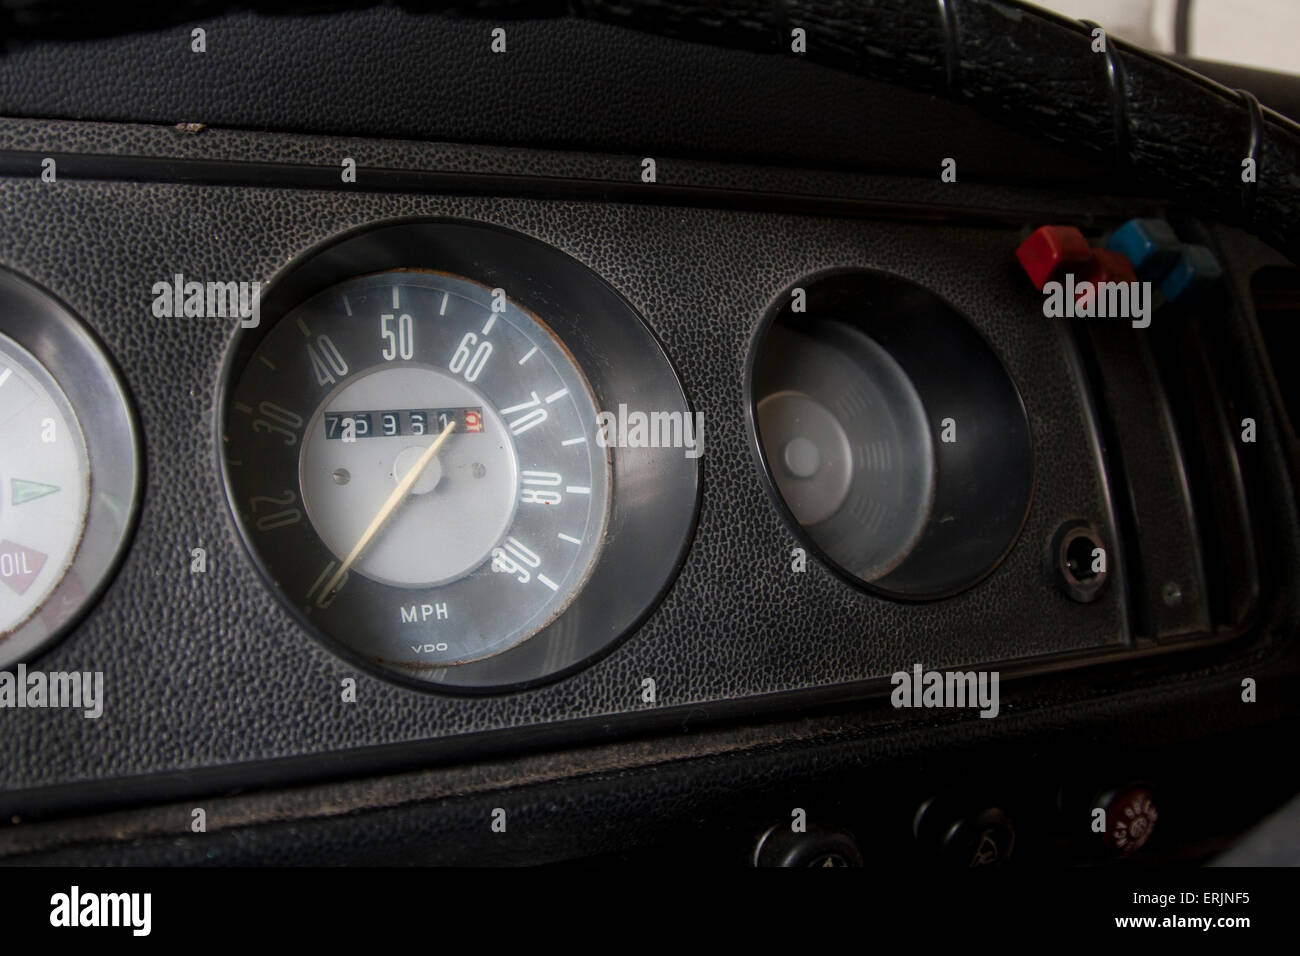 Dashboard information panel of a 1971 vintage VW bus. Stock Photo